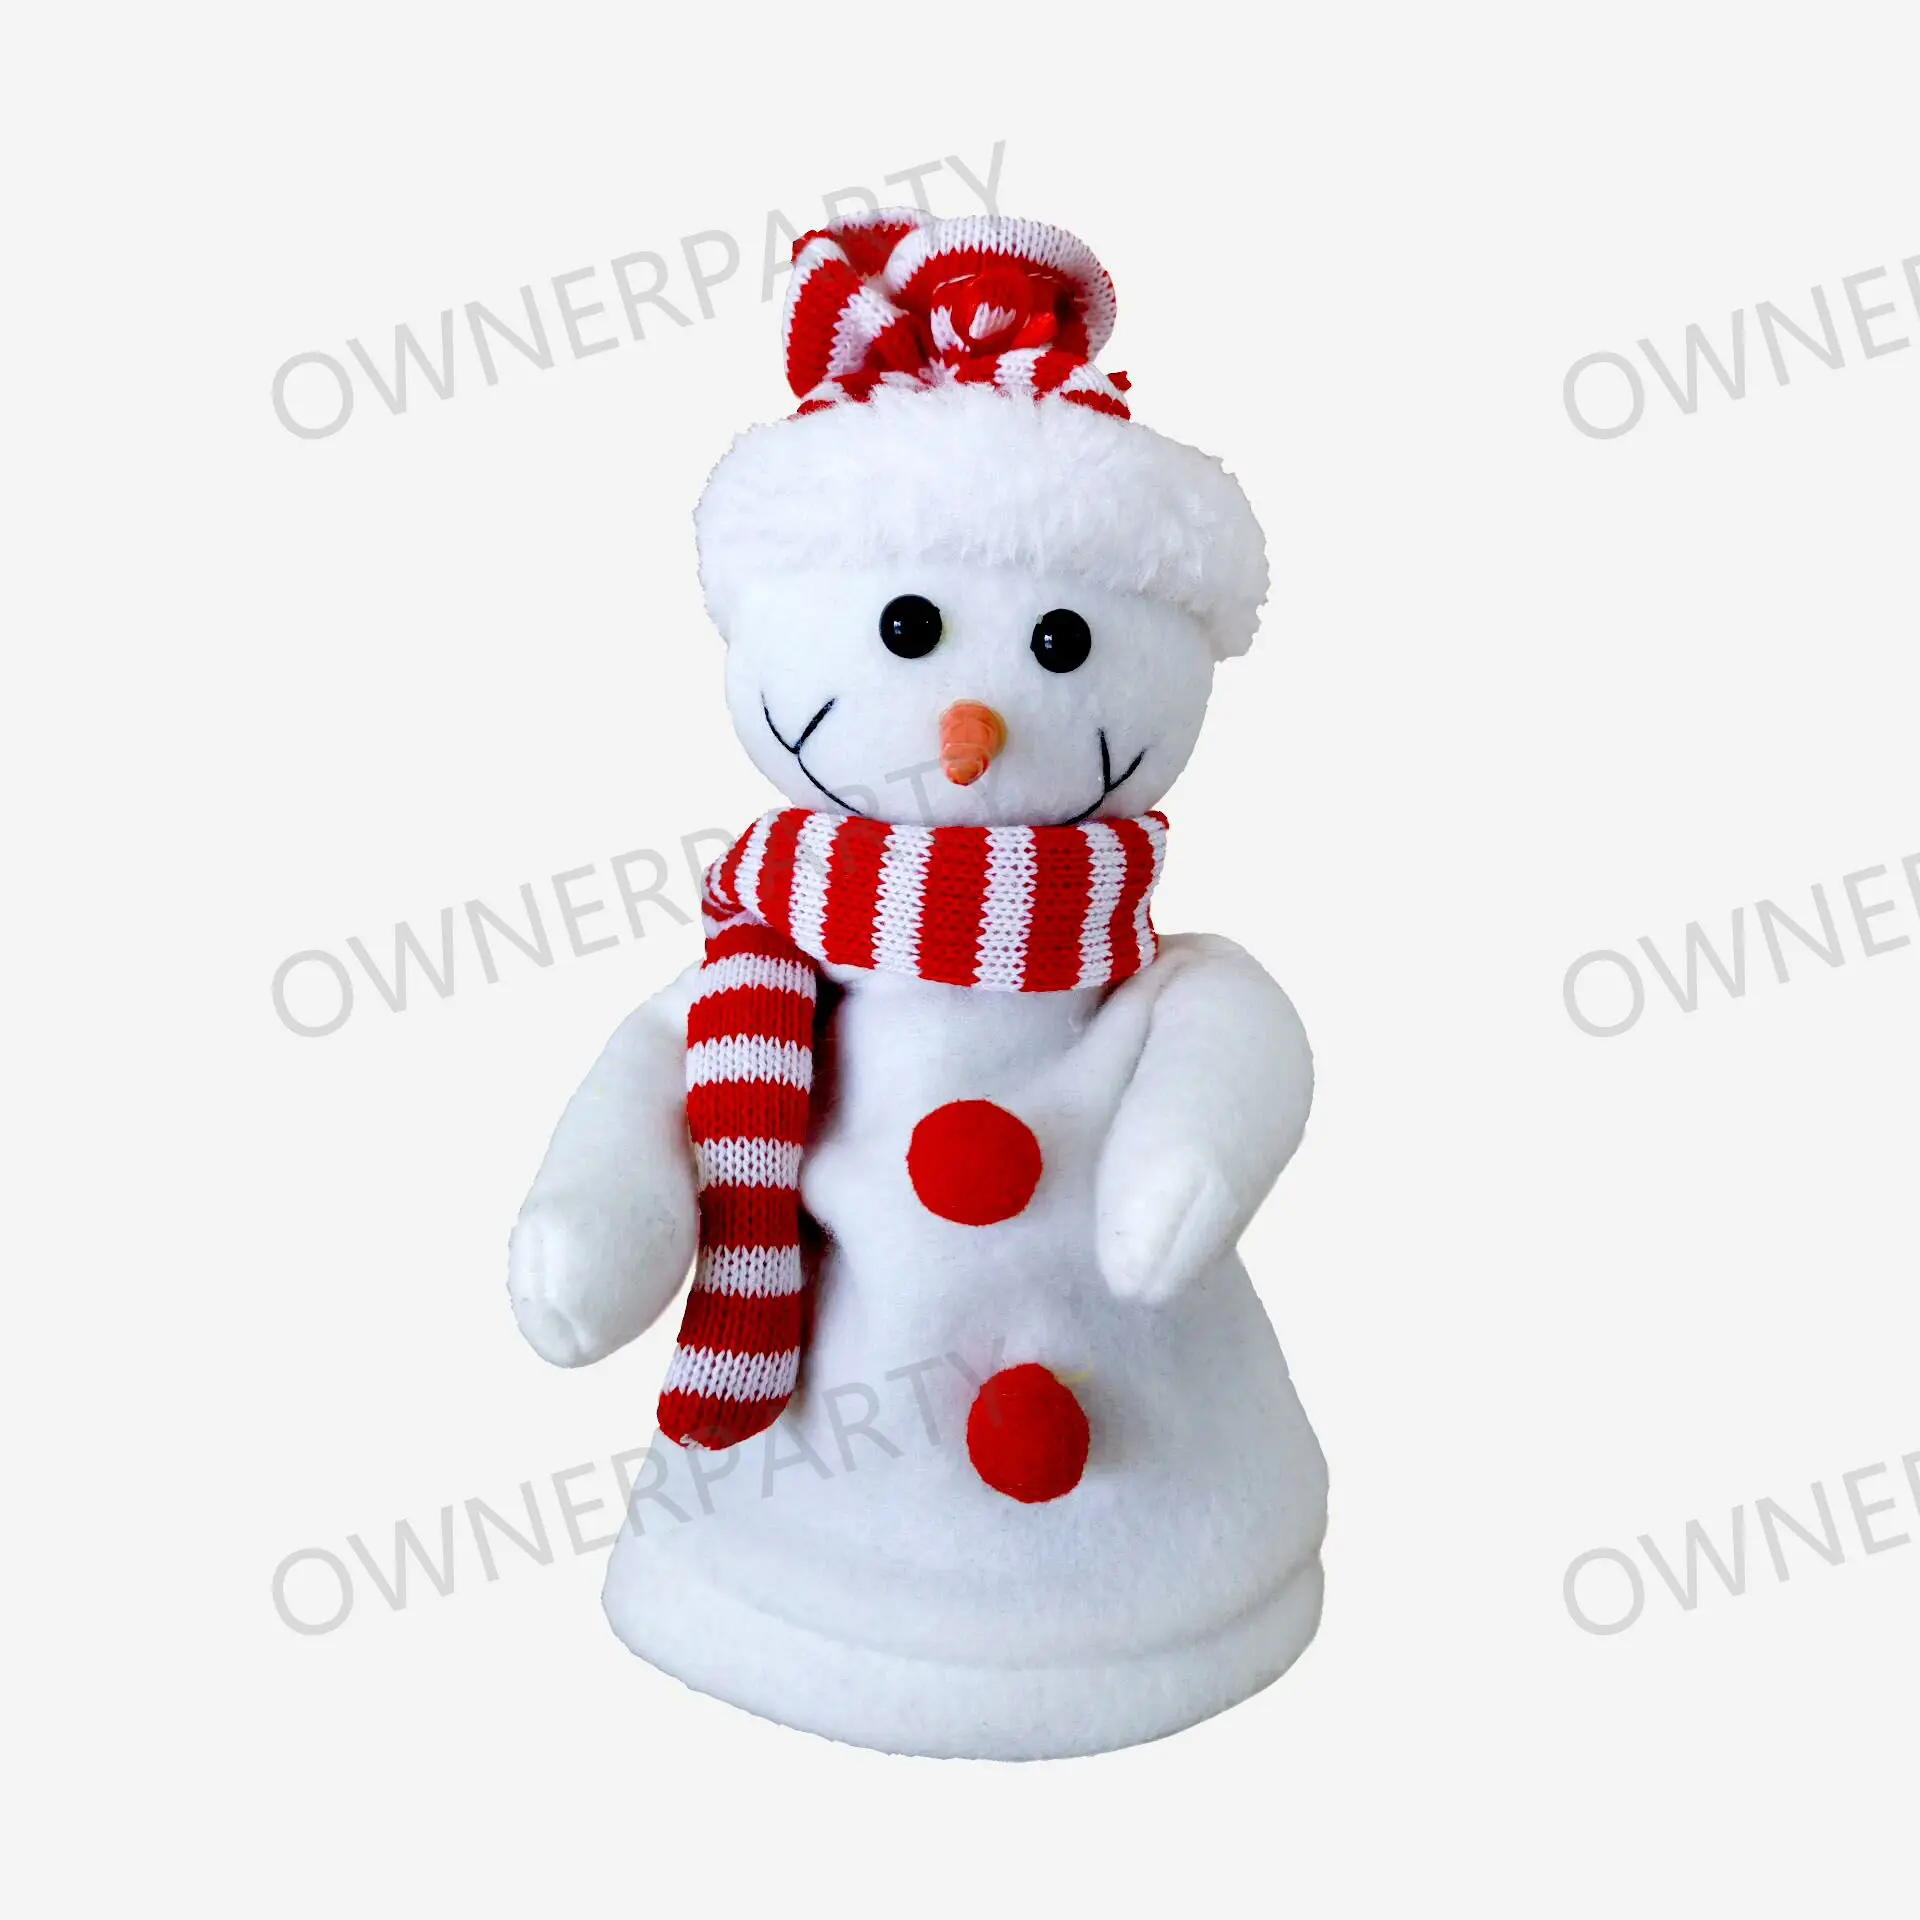 Standing Snowman Toys Plush Doll Christmas Animatronic Outdoor Animated Christmas Decorations With Music